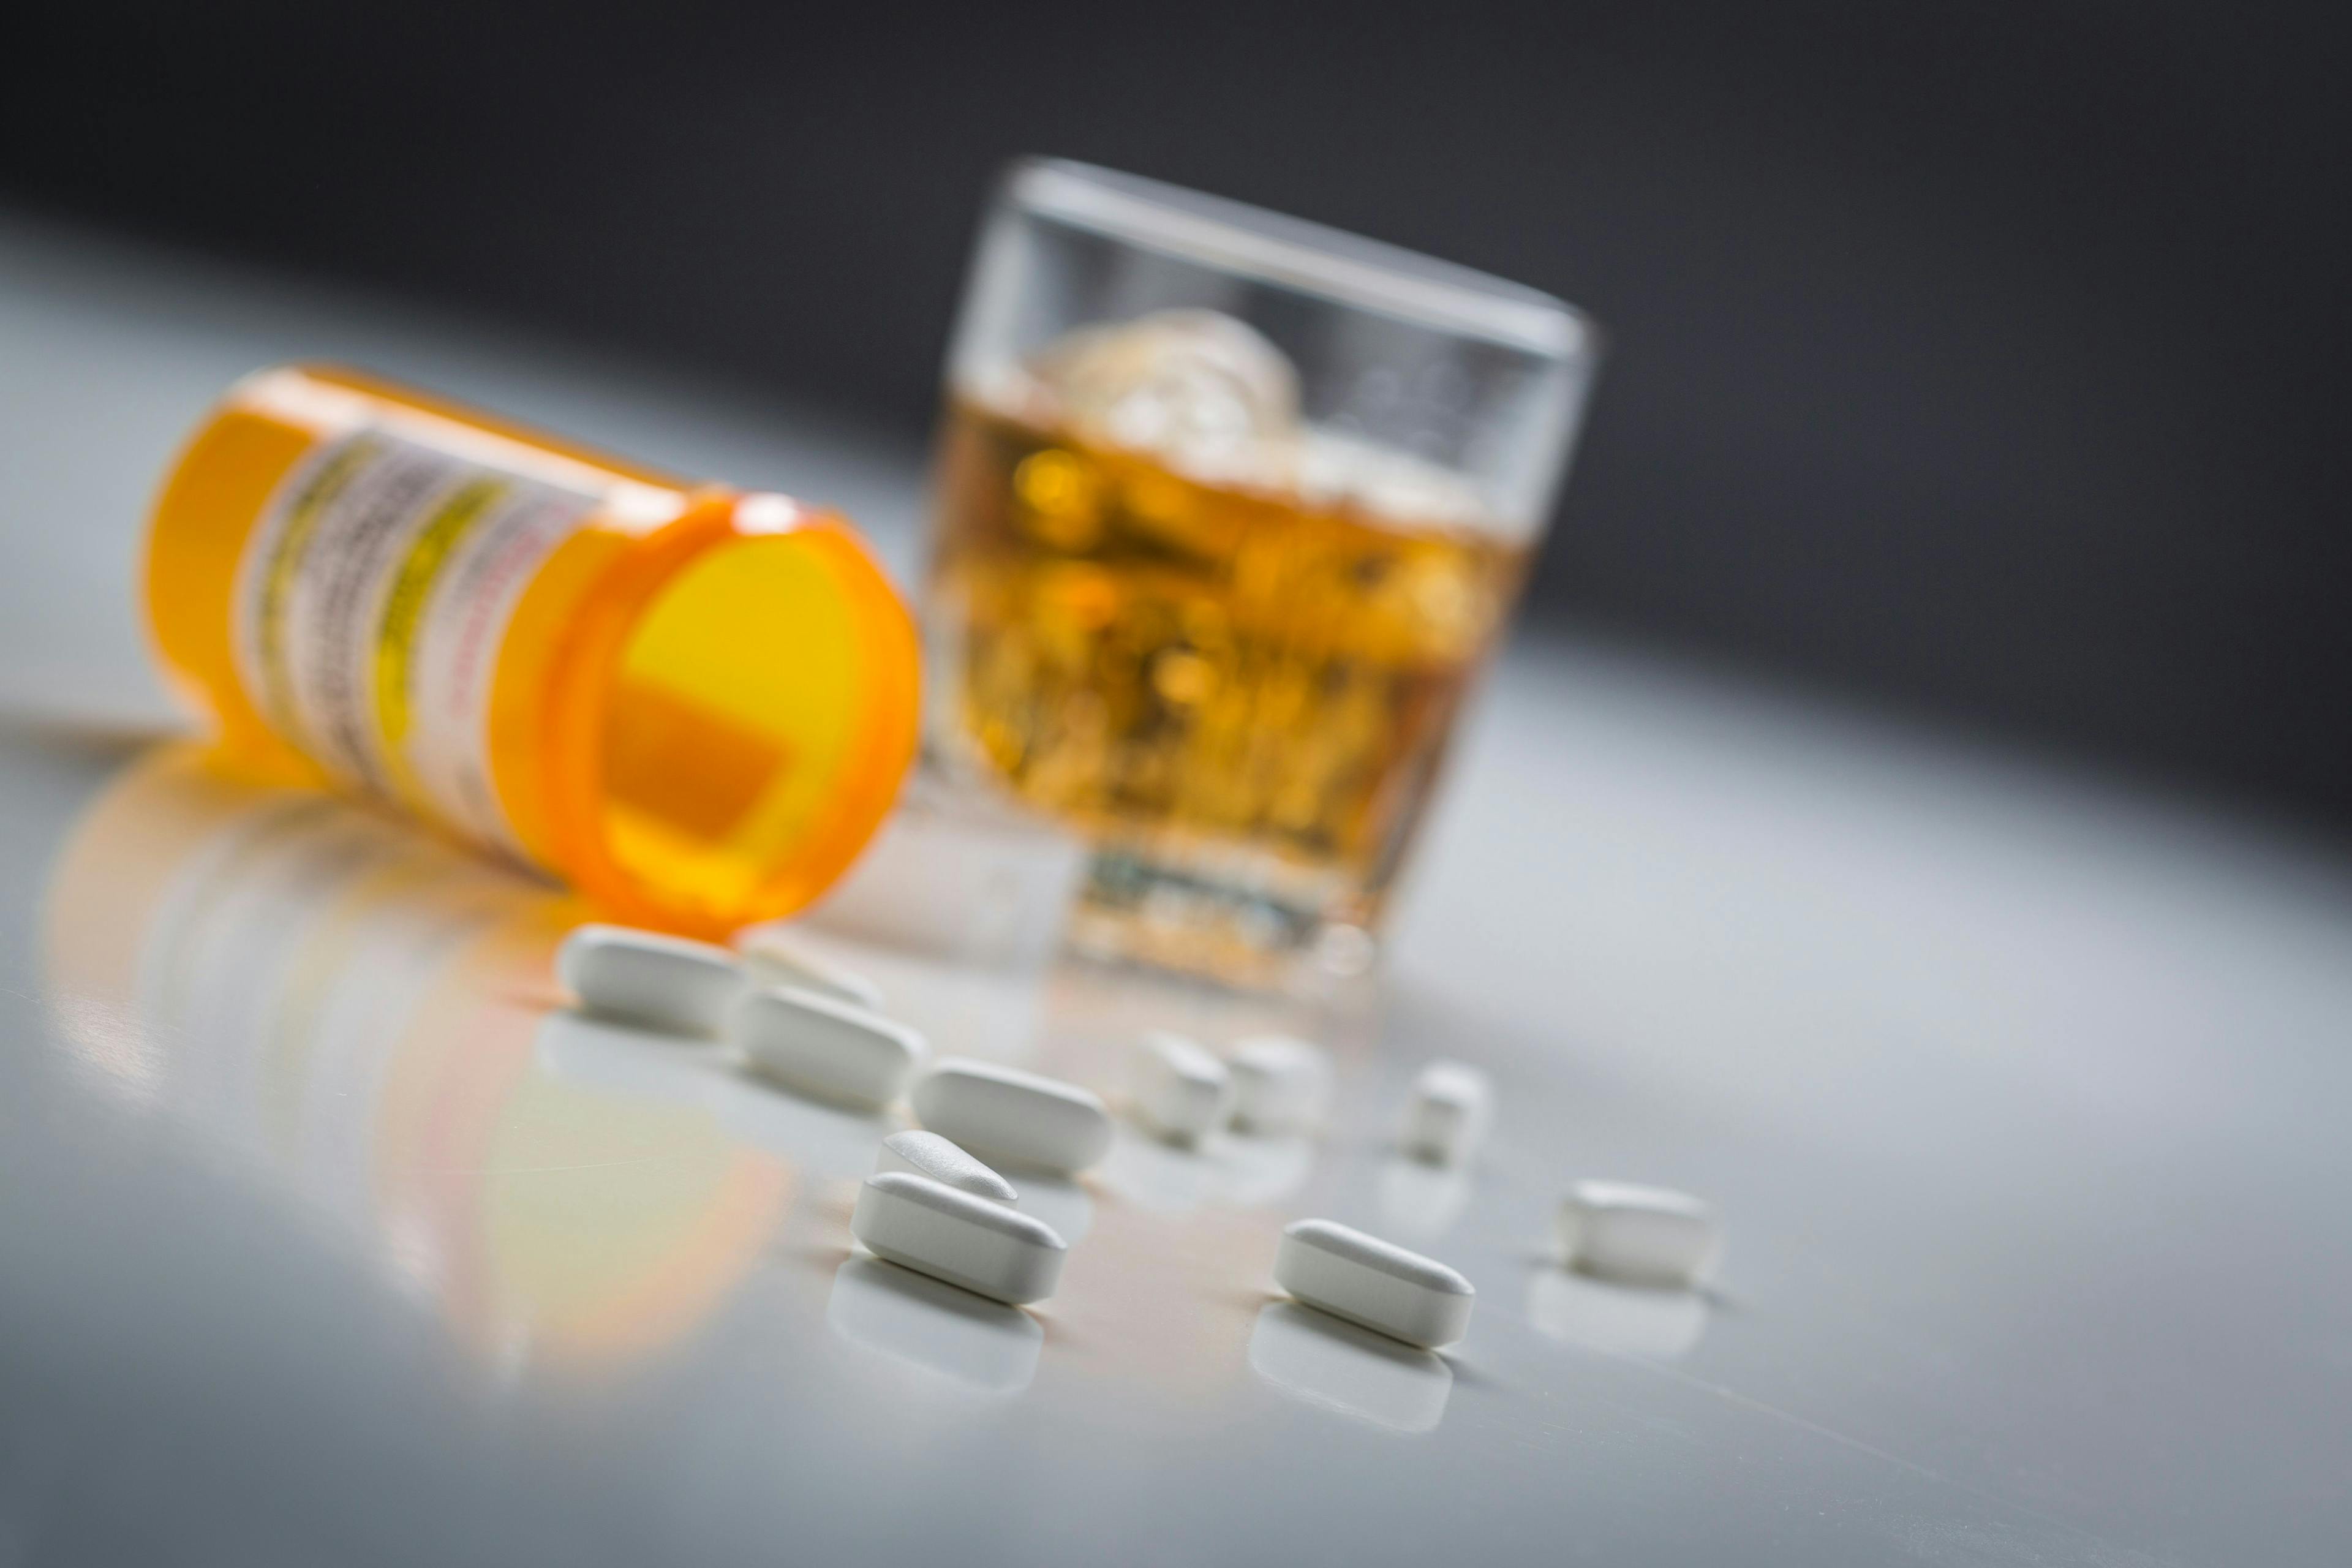 substance use disorder